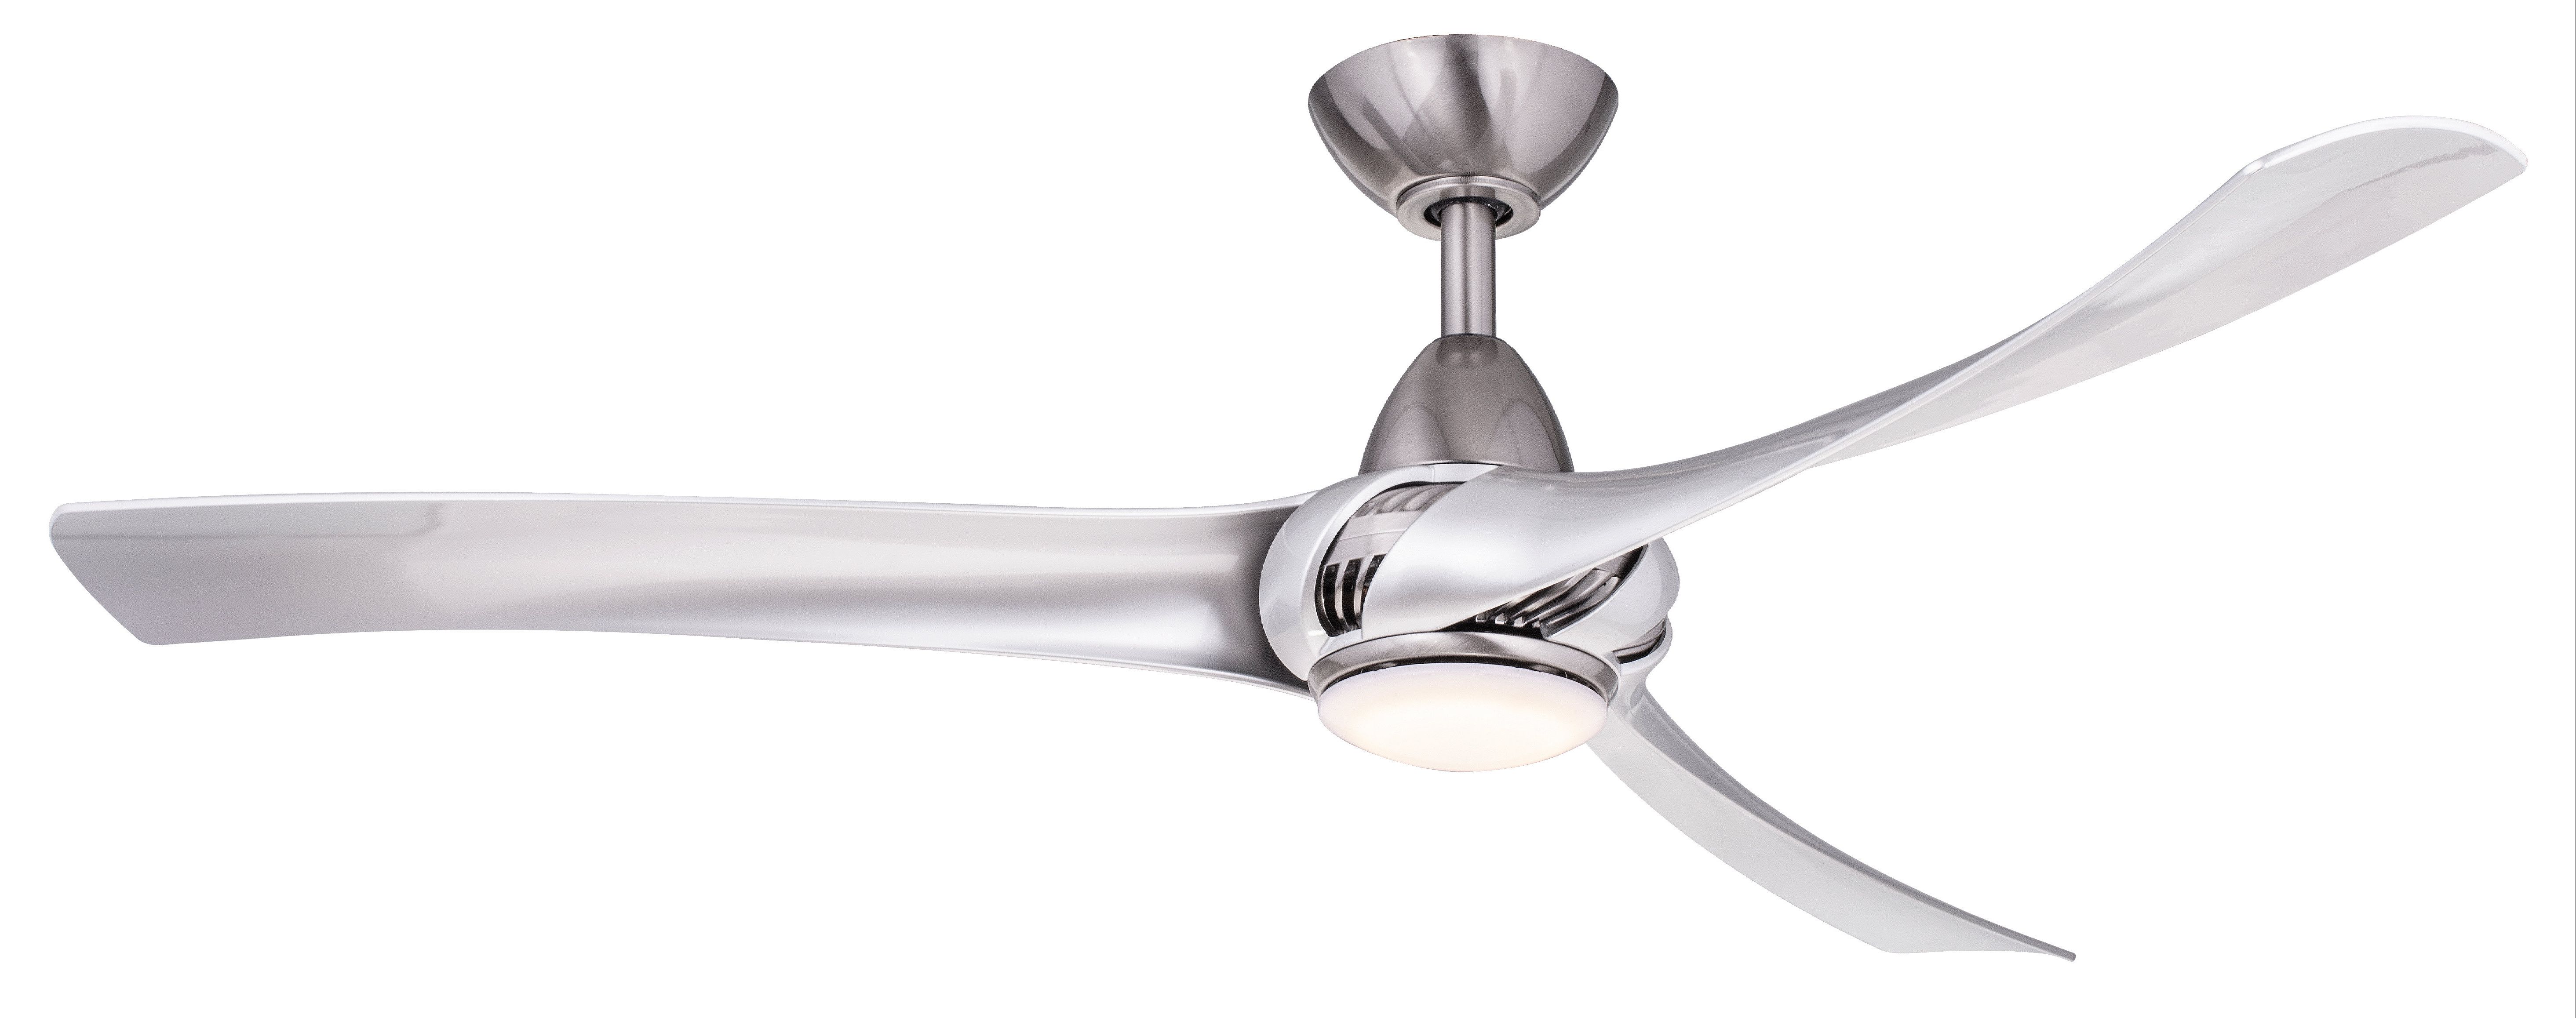 Fashionable Cairo 3 Blade Led Ceiling Fans With Remote Pertaining To Three Posts Cairo 52" 3 Blade Led Ceiling Fan With Remote (View 4 of 20)